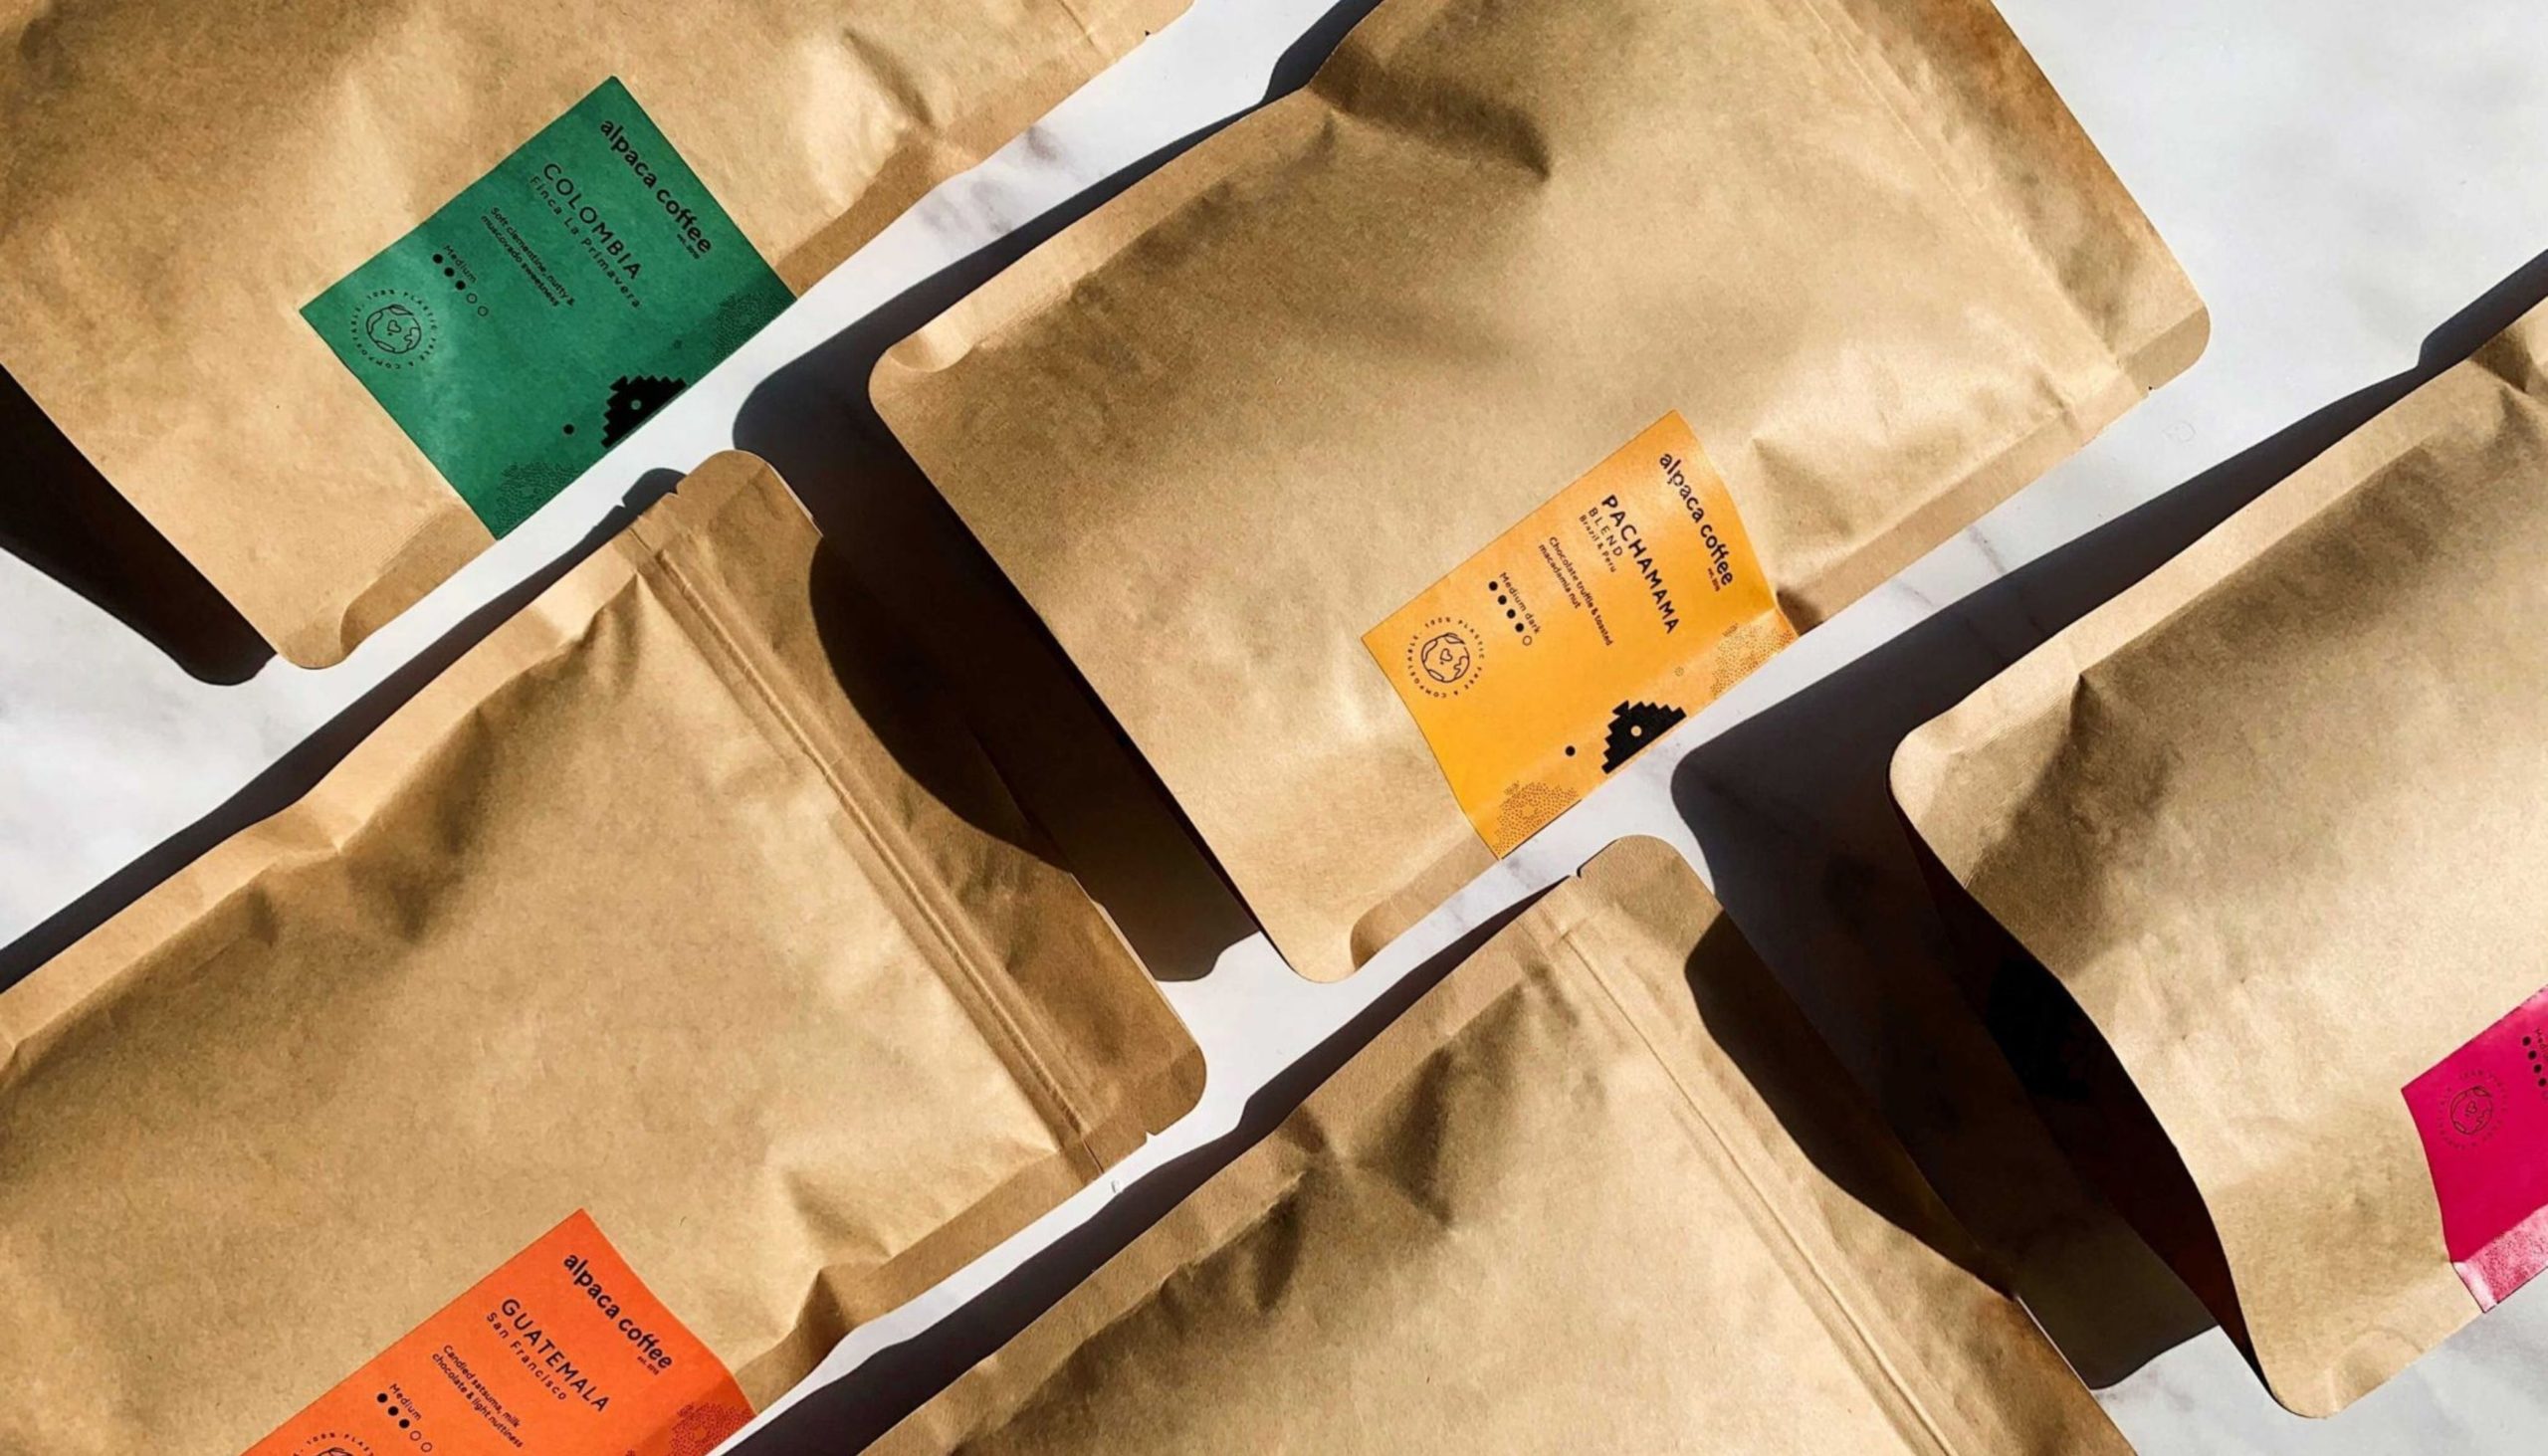 Plastic-free Alpaca Coffee gets a fresh launch and look